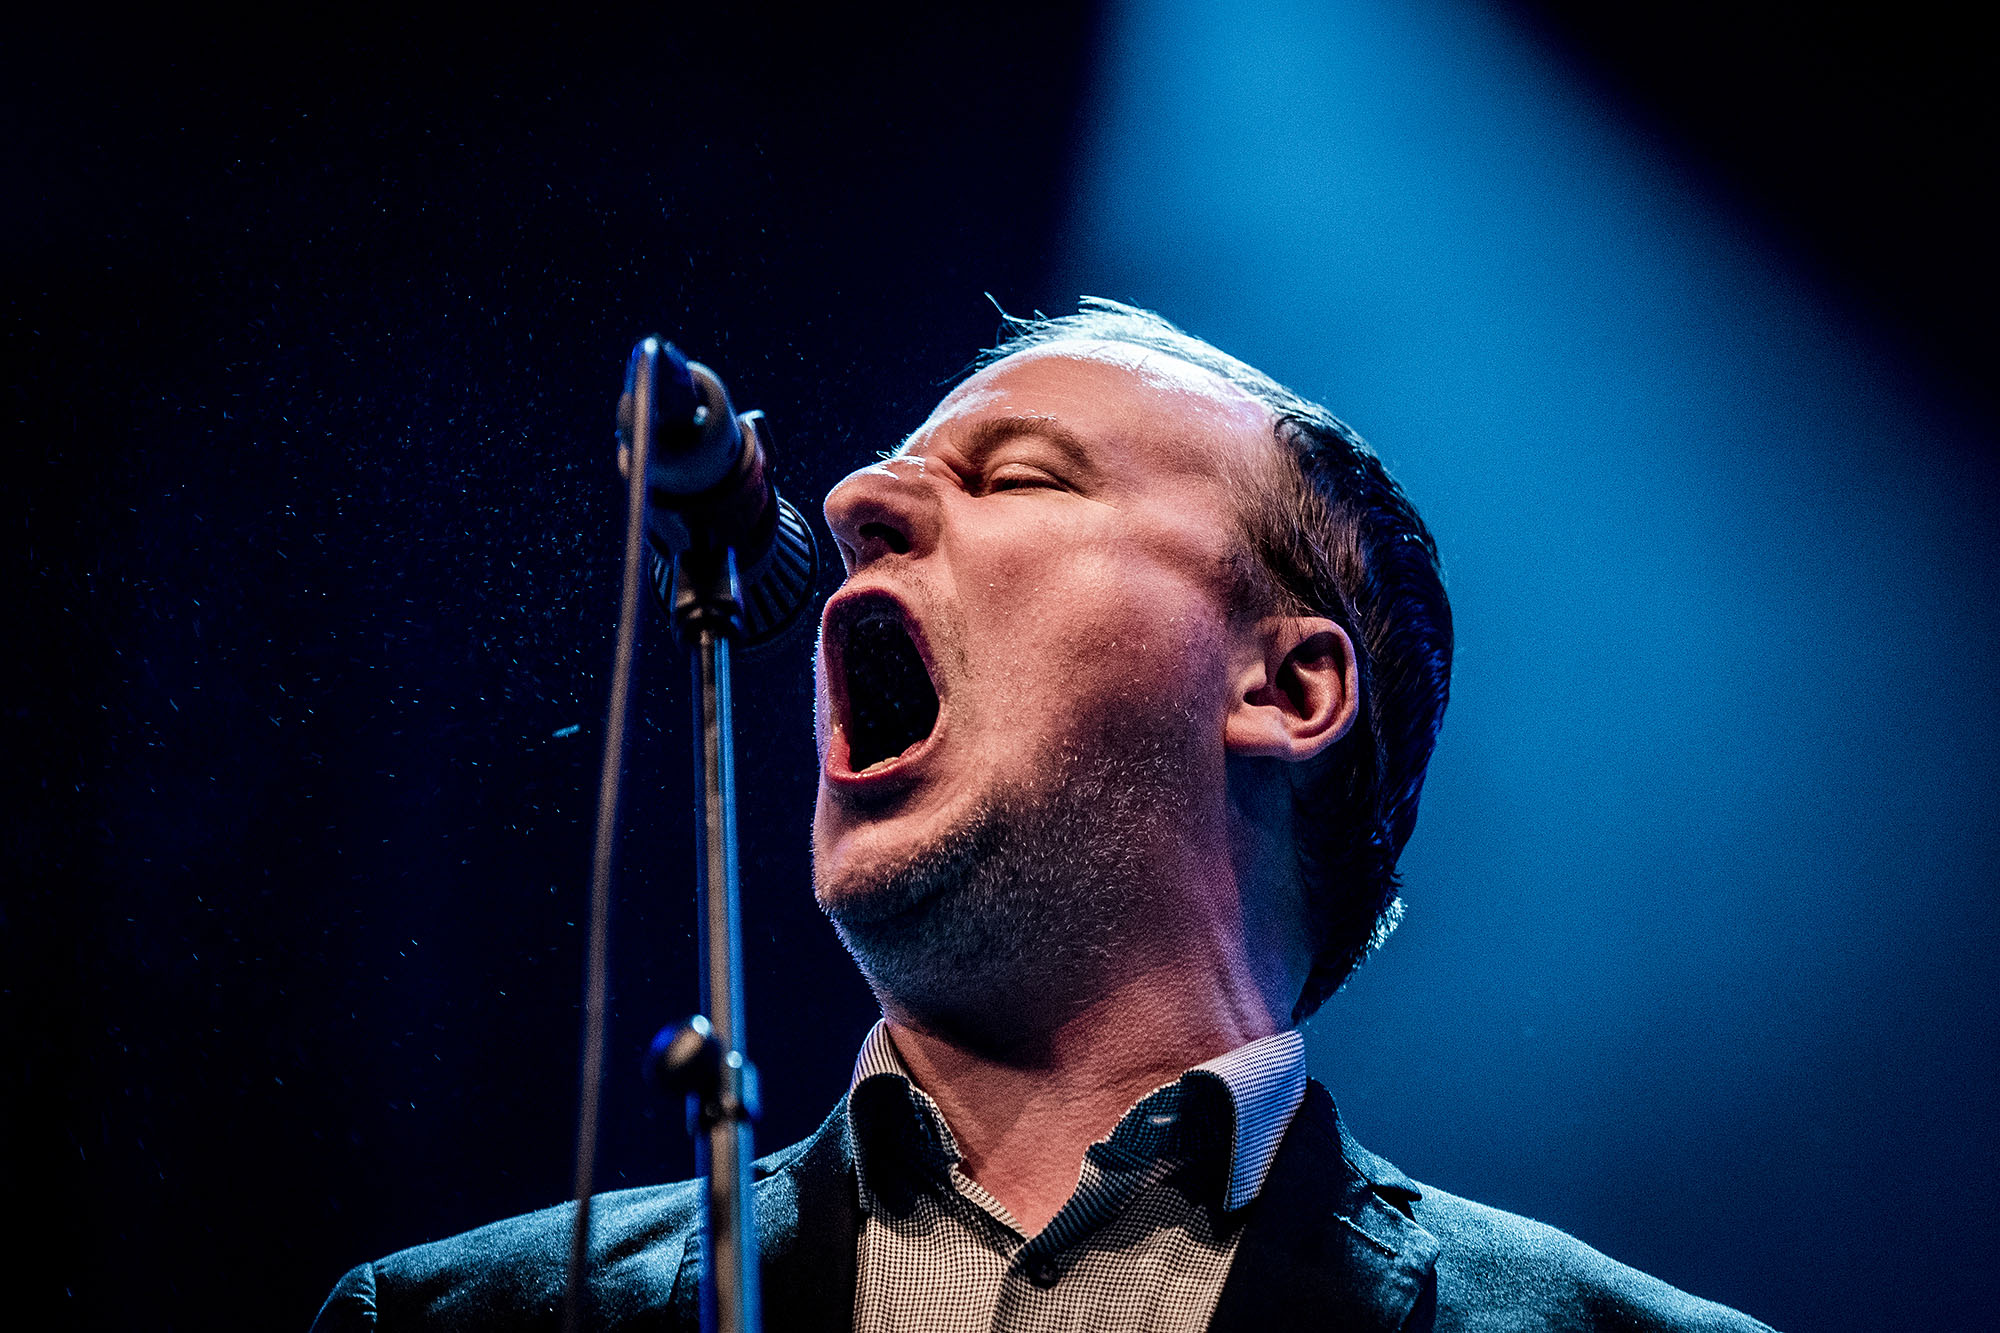 The Line of Best Fit premieres the recordings of Protomartyr live at LGW17